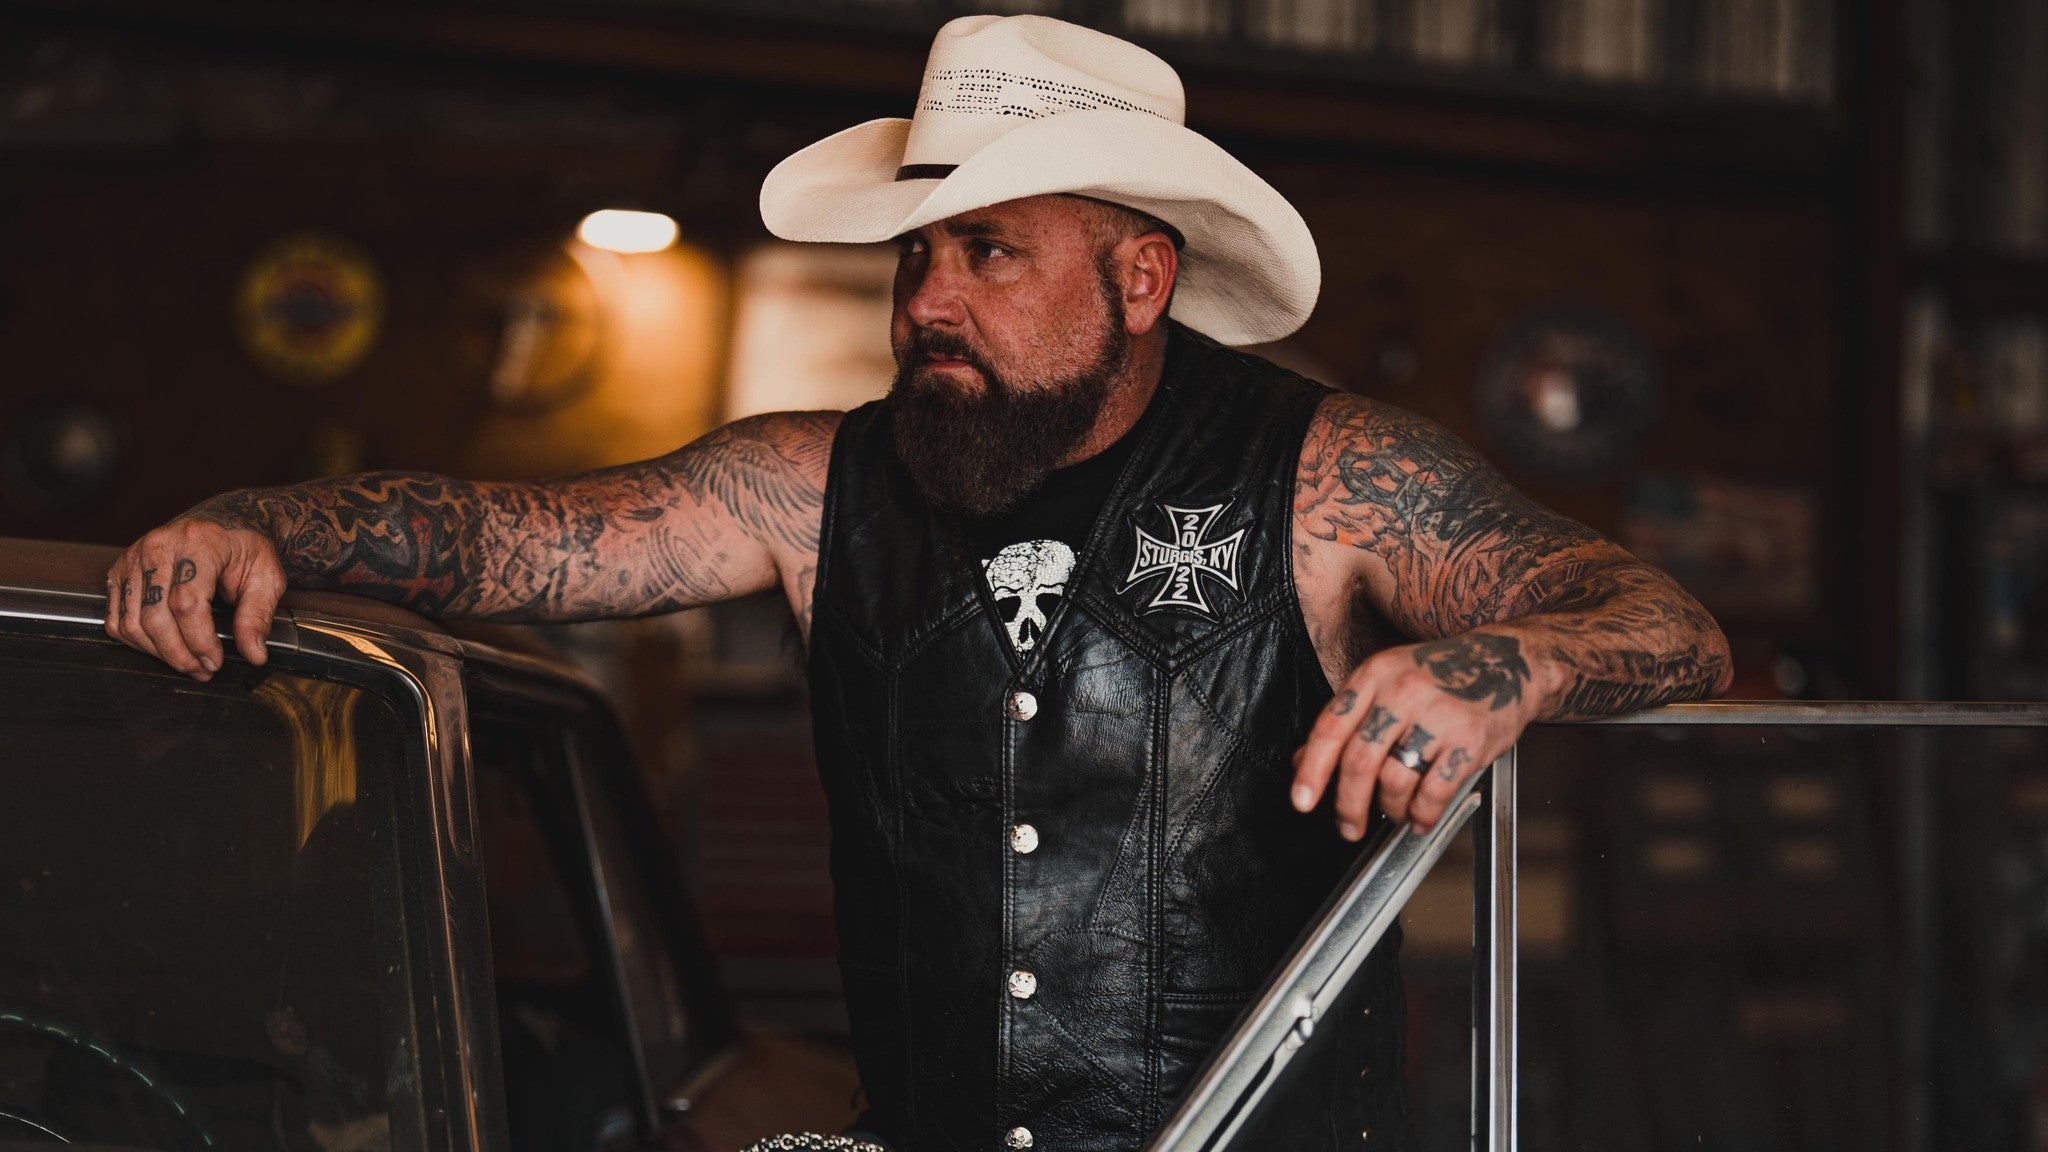 Creed Fisher at Wildwood Smokehouse and Saloon